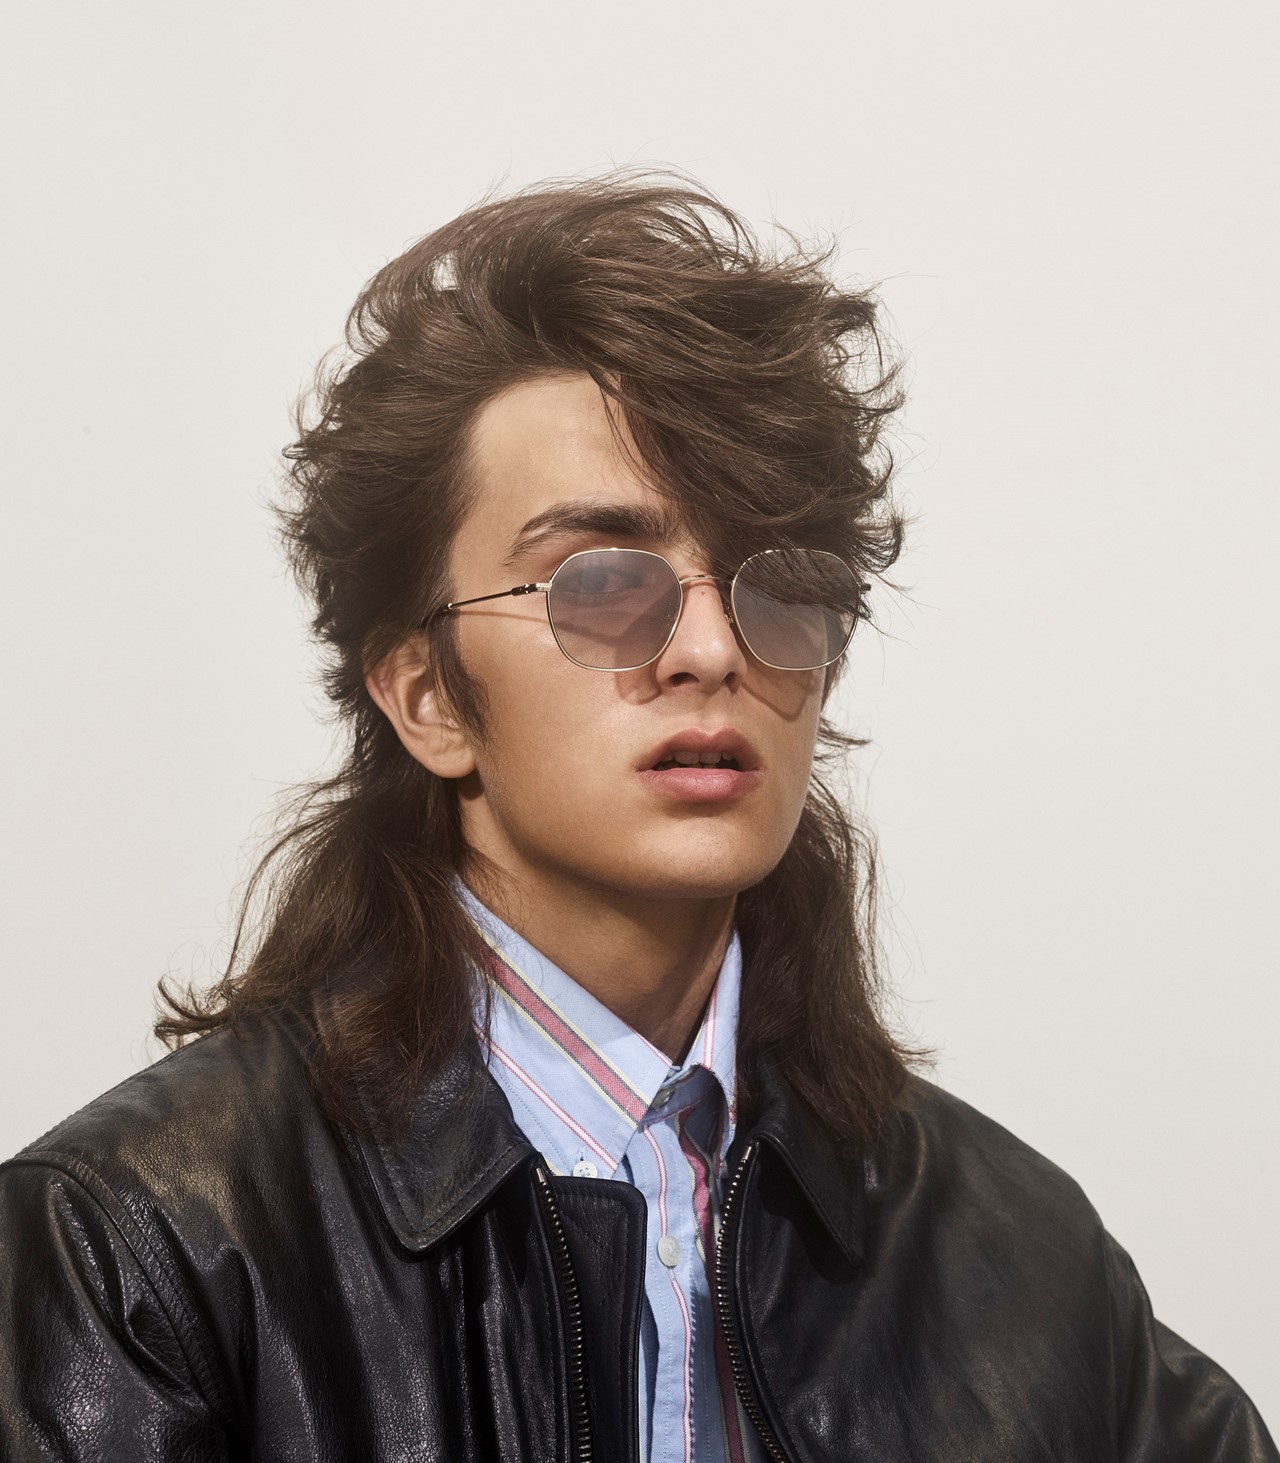 Carrera channels 80s yearbooks for its new lookbook | Dazed